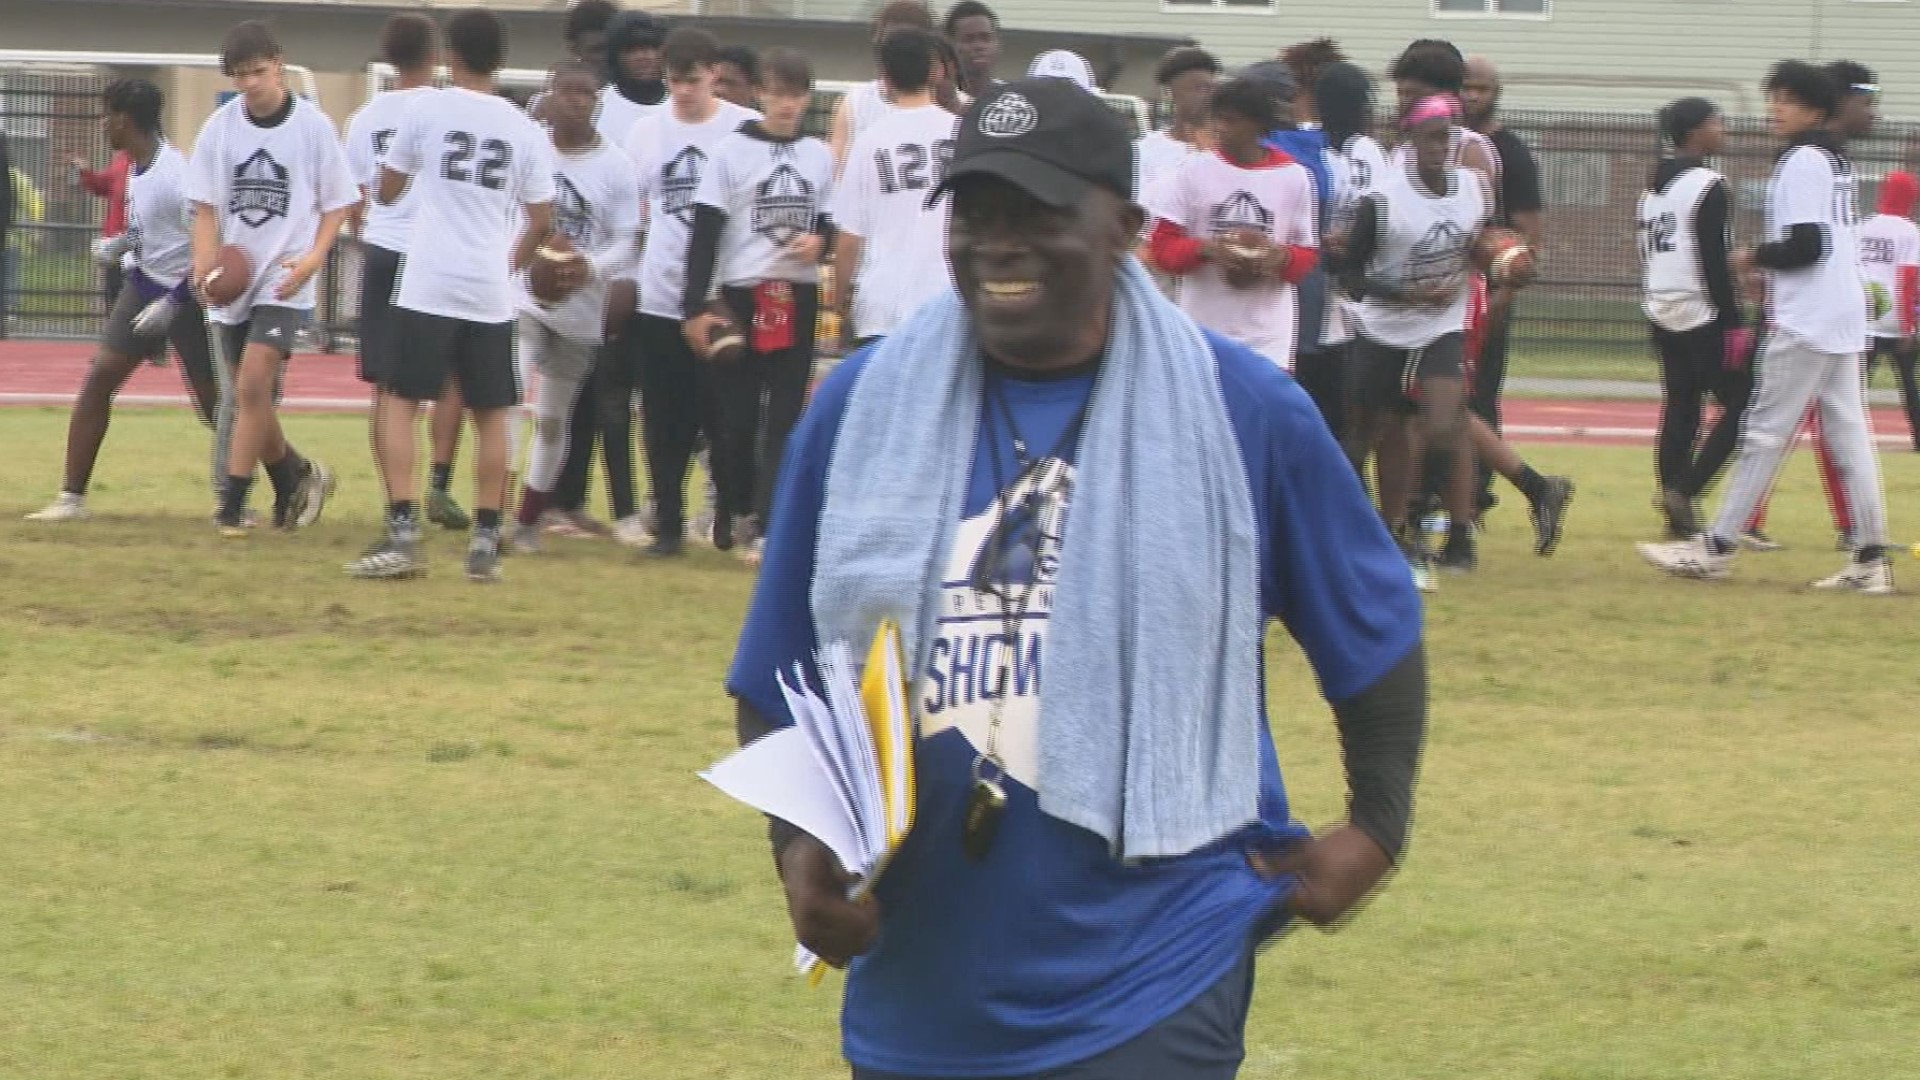 The now 70 year old had a change of mind and on Wednesday will be back on the sidelines as the head coach at Denbigh High School in Newport News.